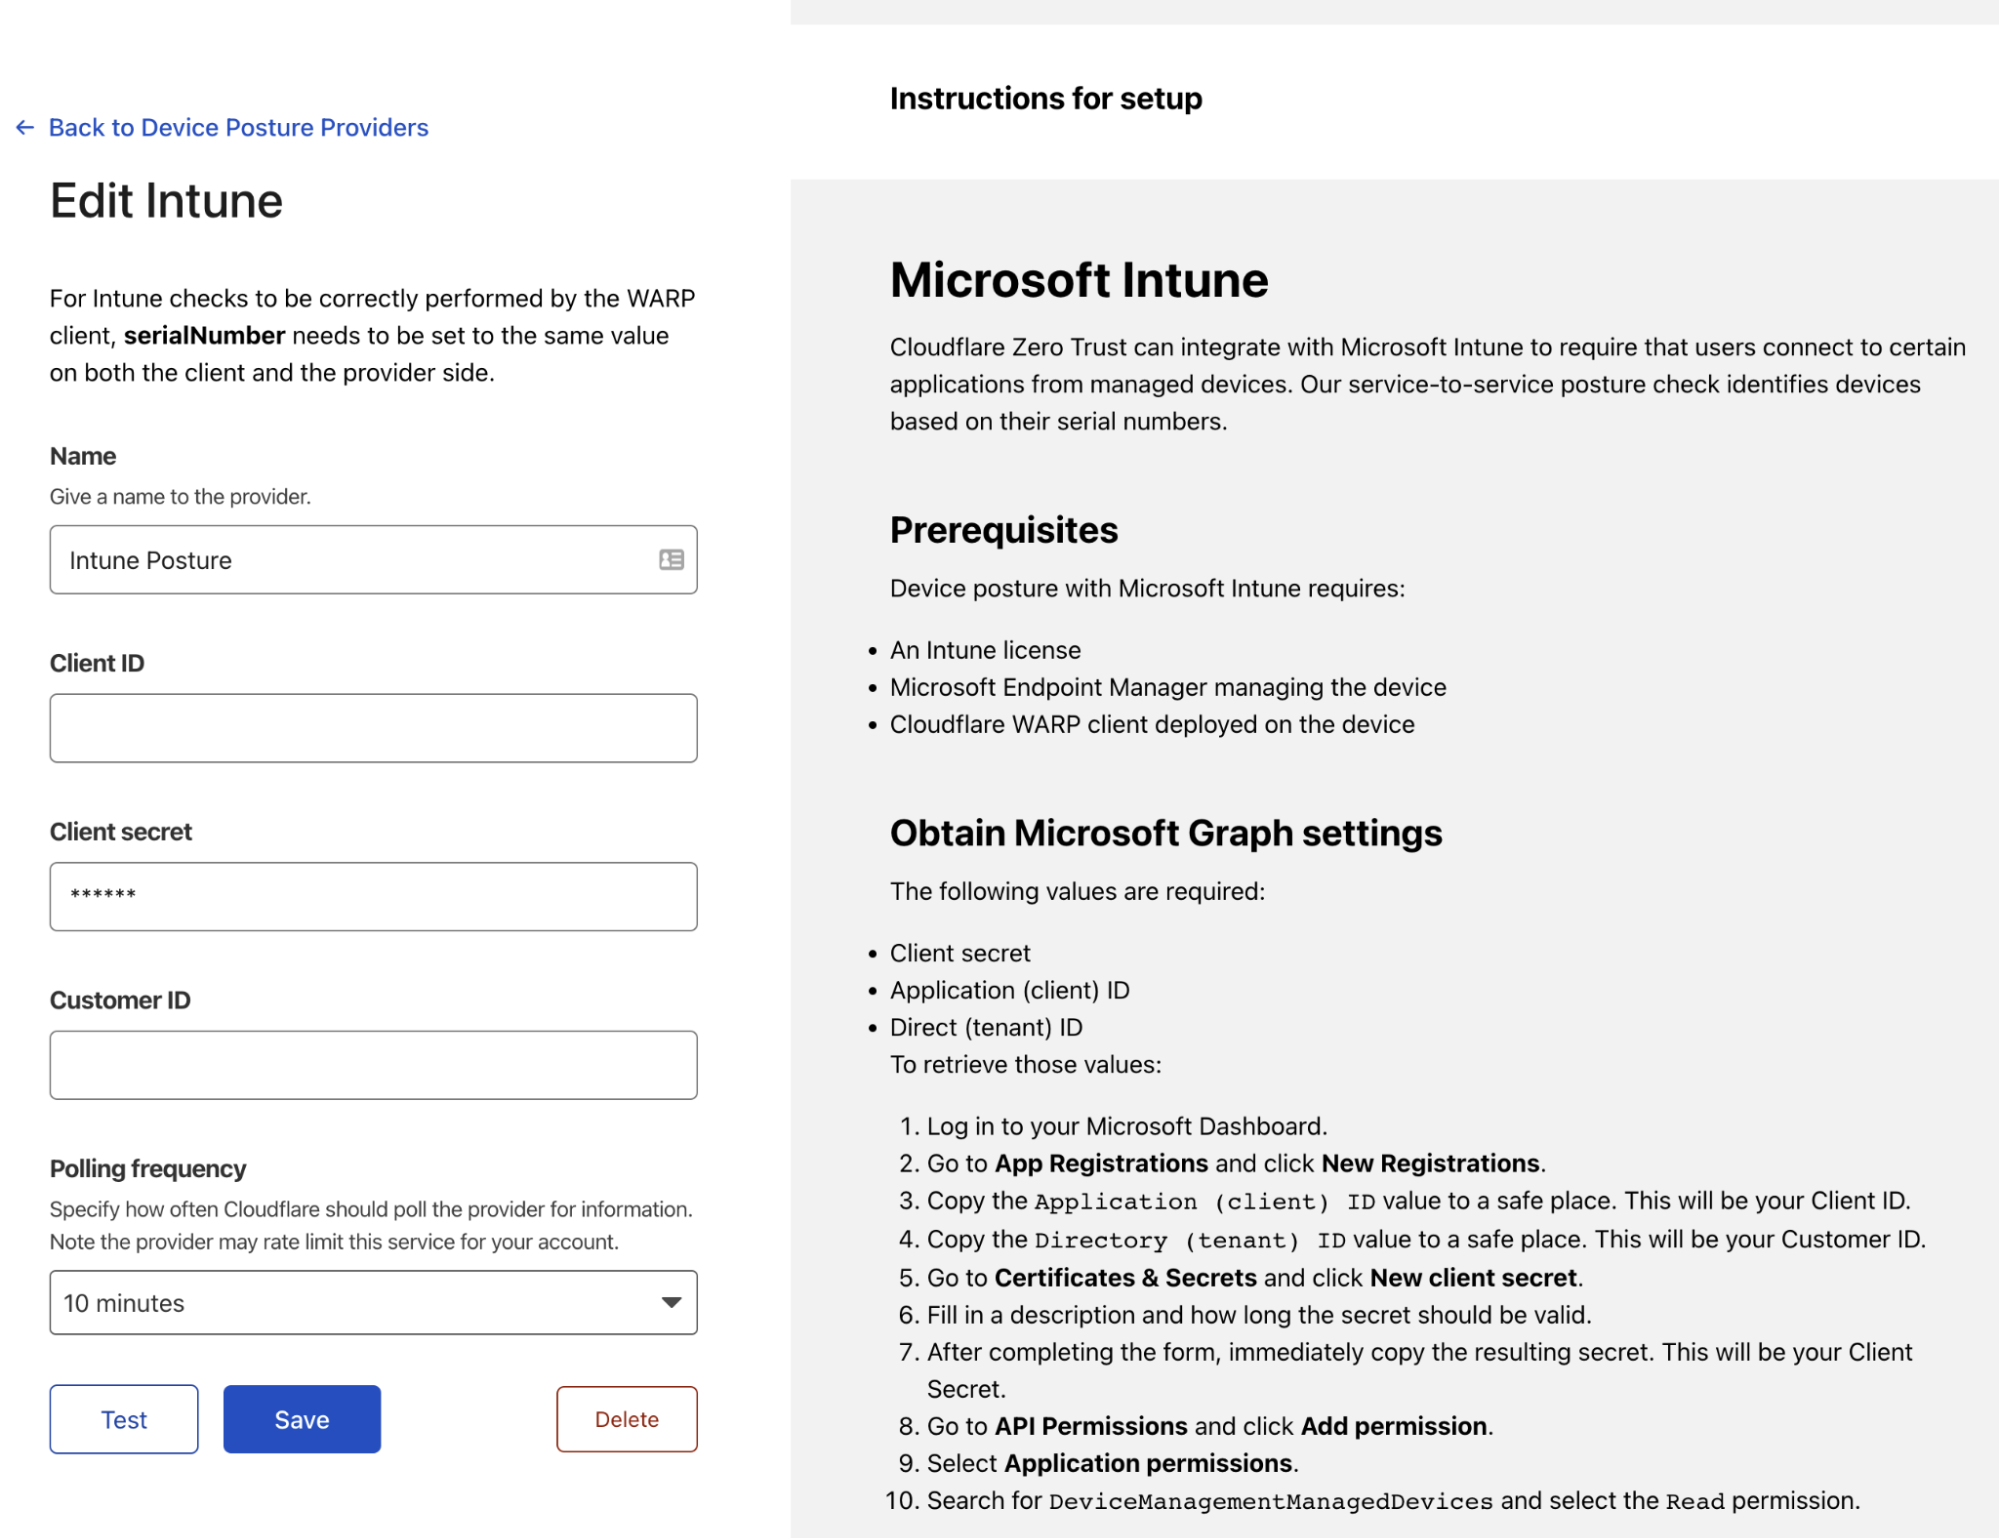 Cloudflare integrates with
Microsoft Intune to give CISOs
secure control across devices,
applications, and corporate networks